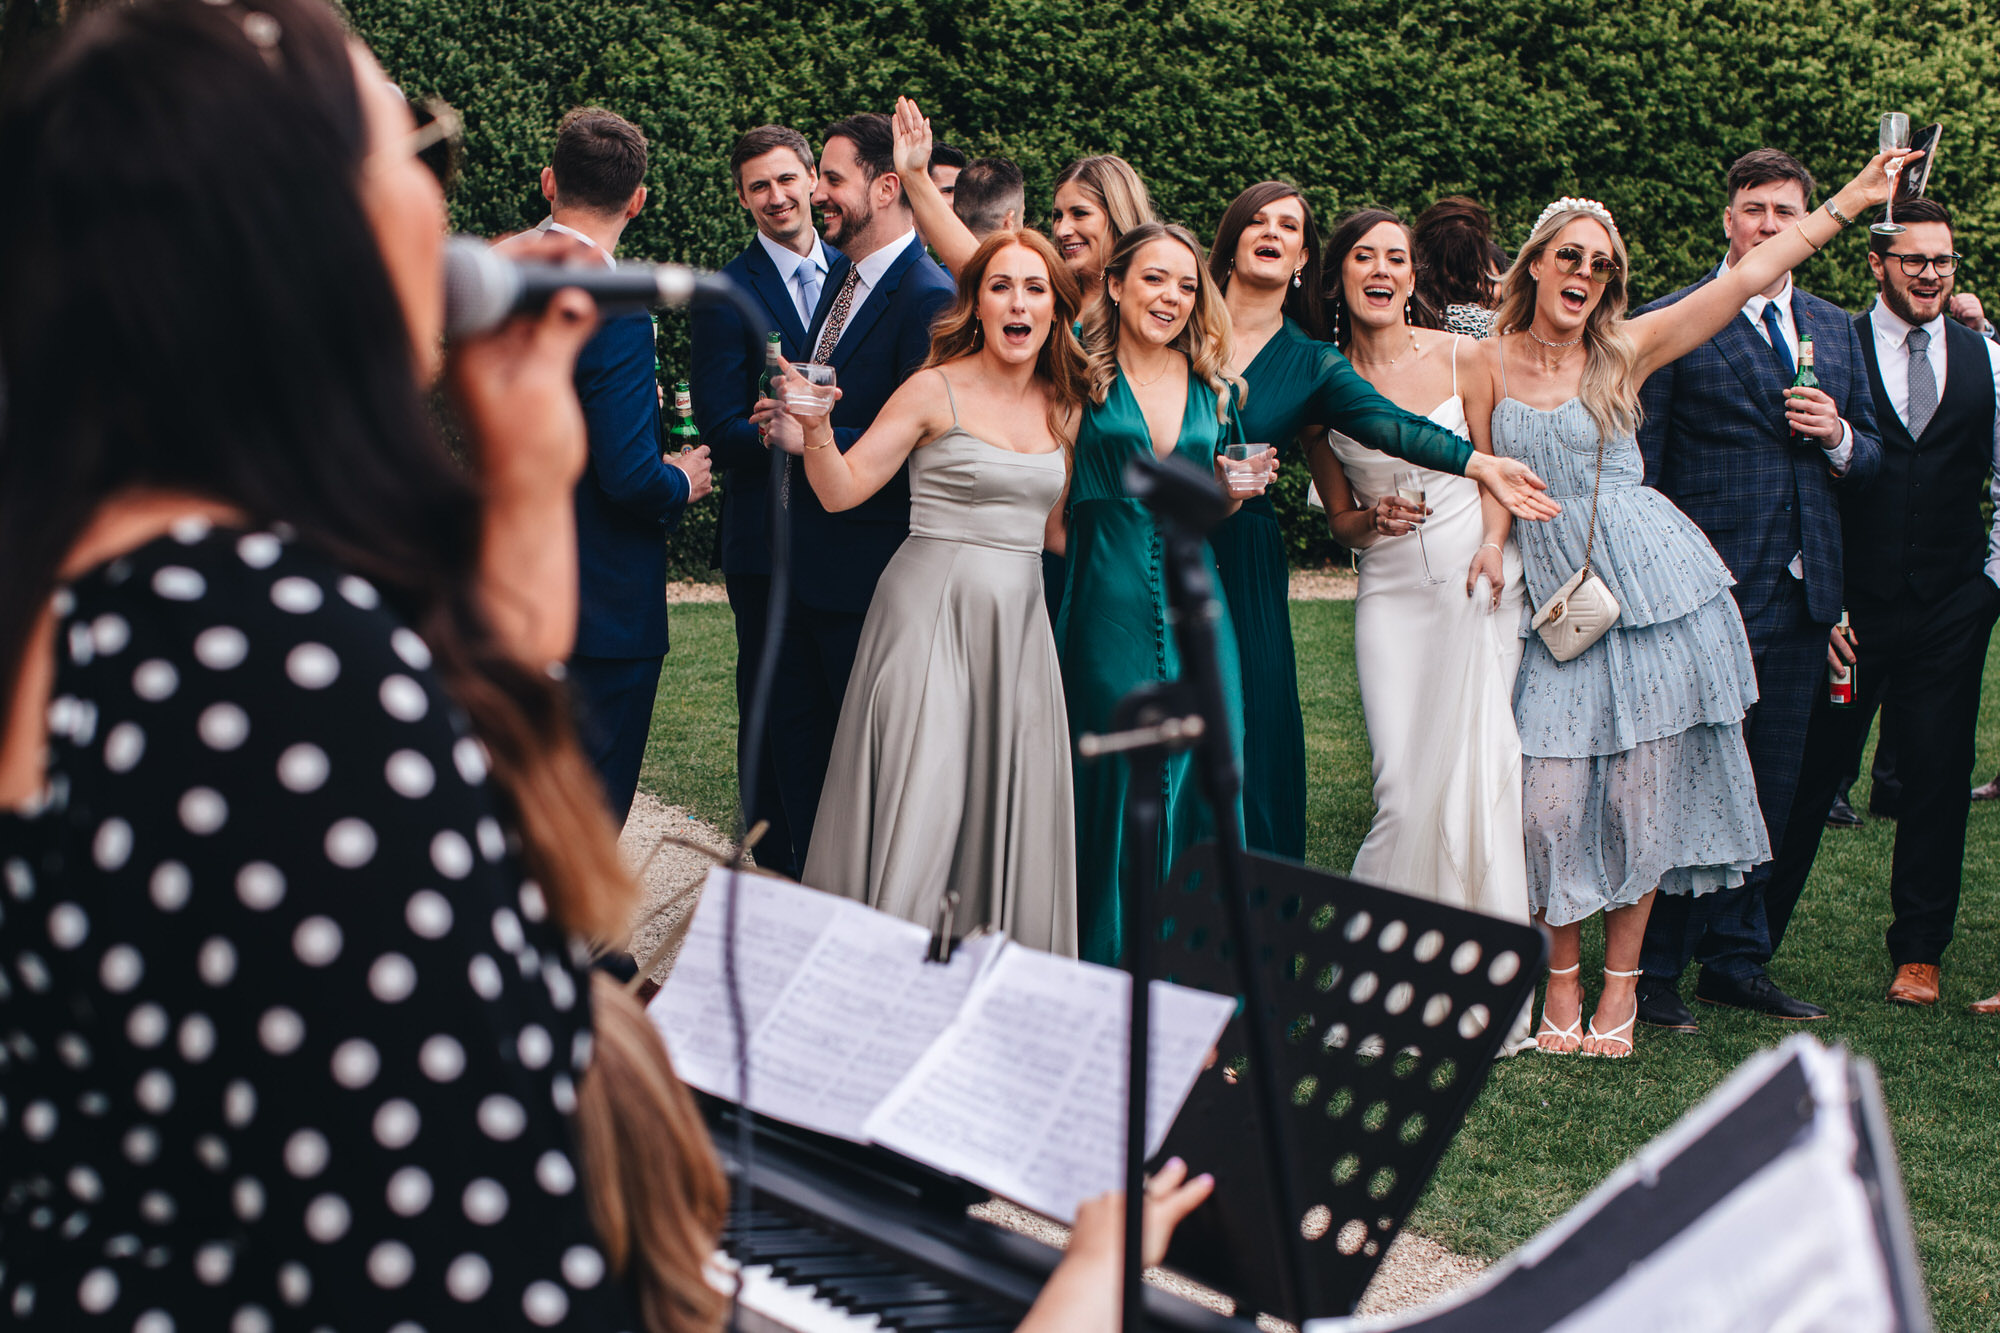 guests and bride sing along to wedding music performers outside